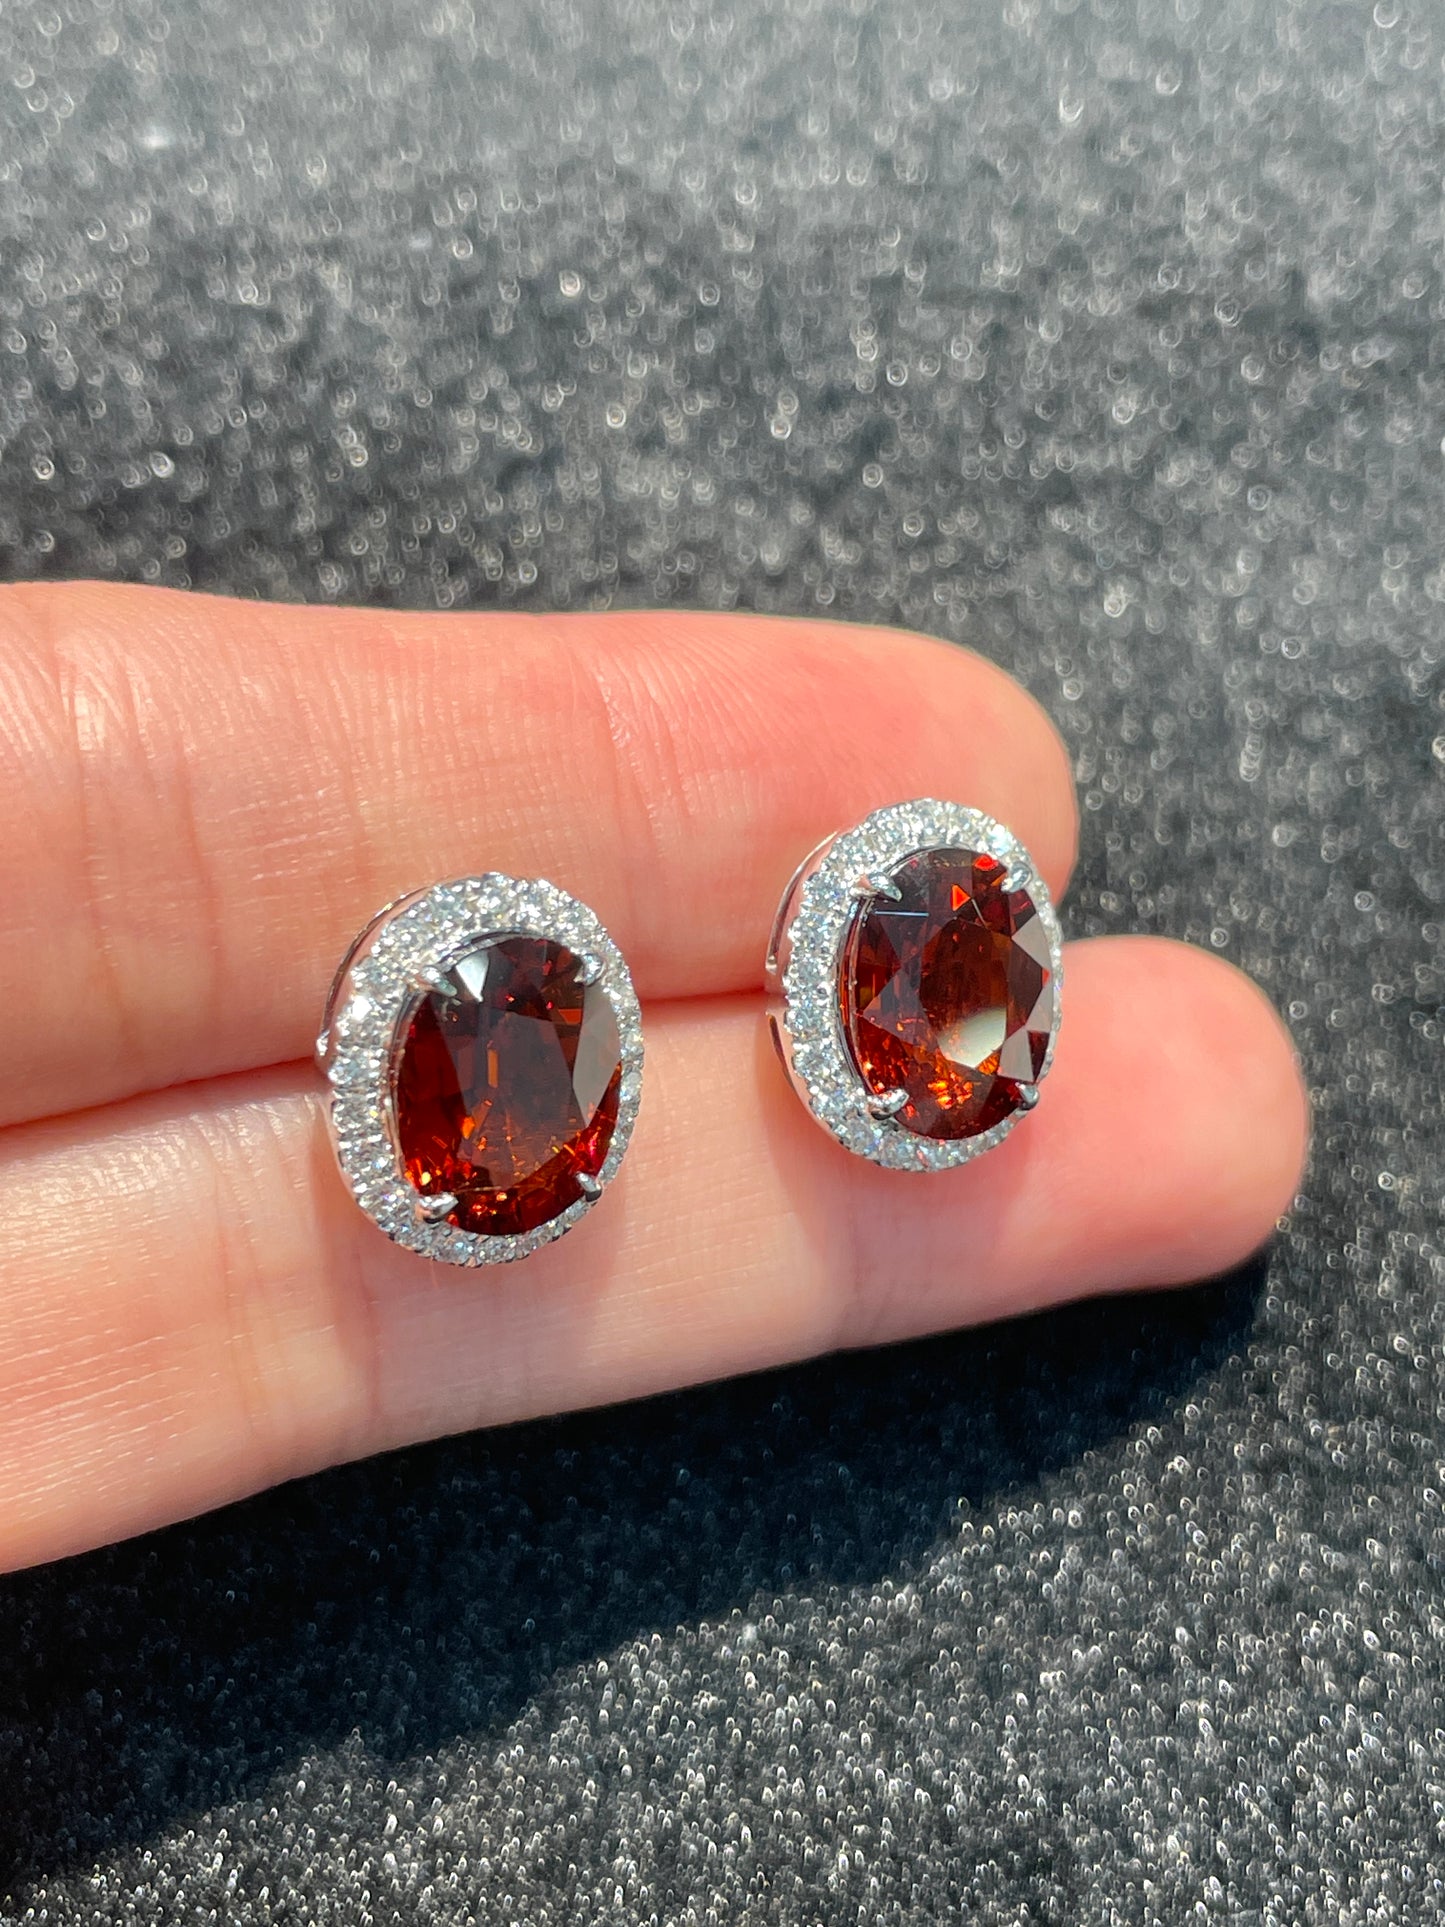 Natural Red Garnet 7.04ct Earrings Set With Natural Diamonds In 18K White Gold Gemstone Singapore Fine Jewellery